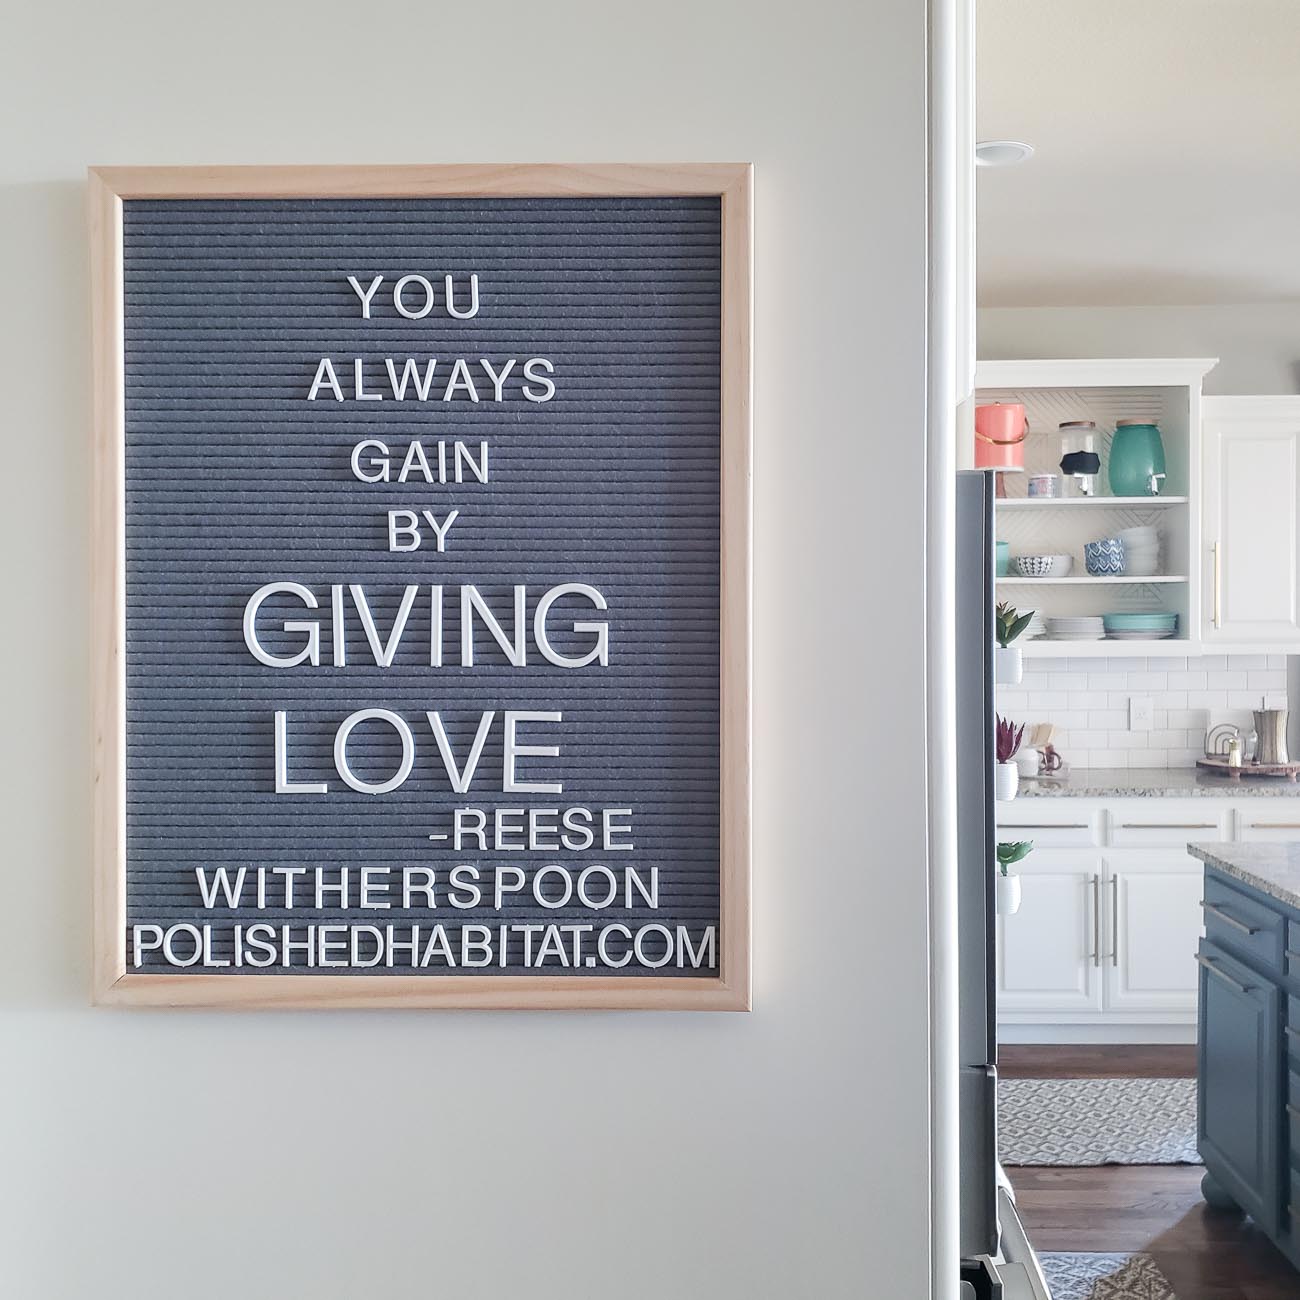 Grey Letter Board with White Letters - You Always Gain by Giving Love.